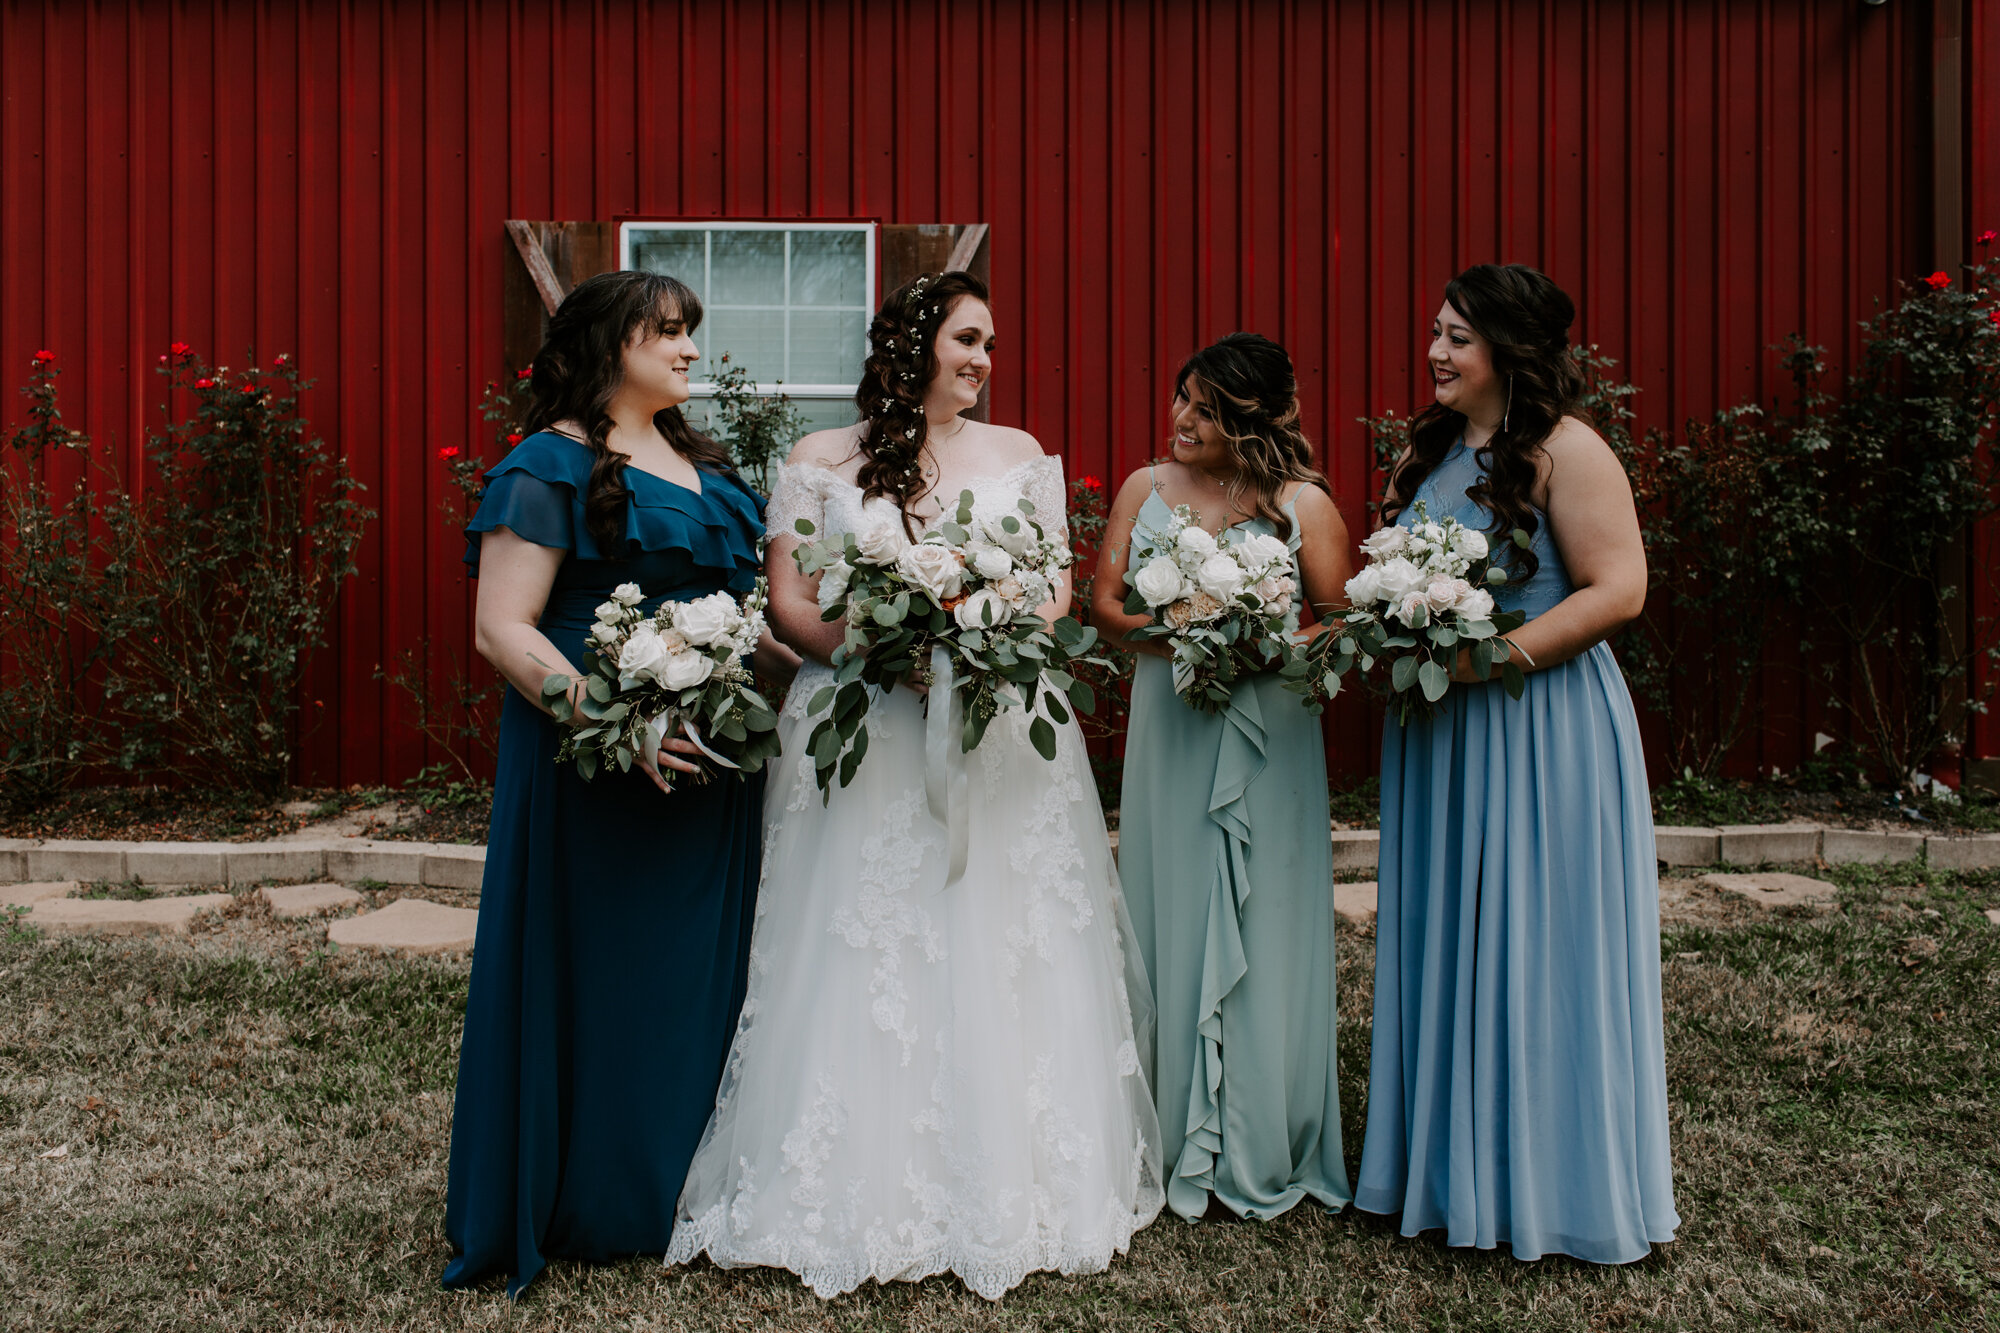 Bride and bridesmaids by the red wall. Fairy Romantic Wedding at Magnolia Bells in Magnolia, TX